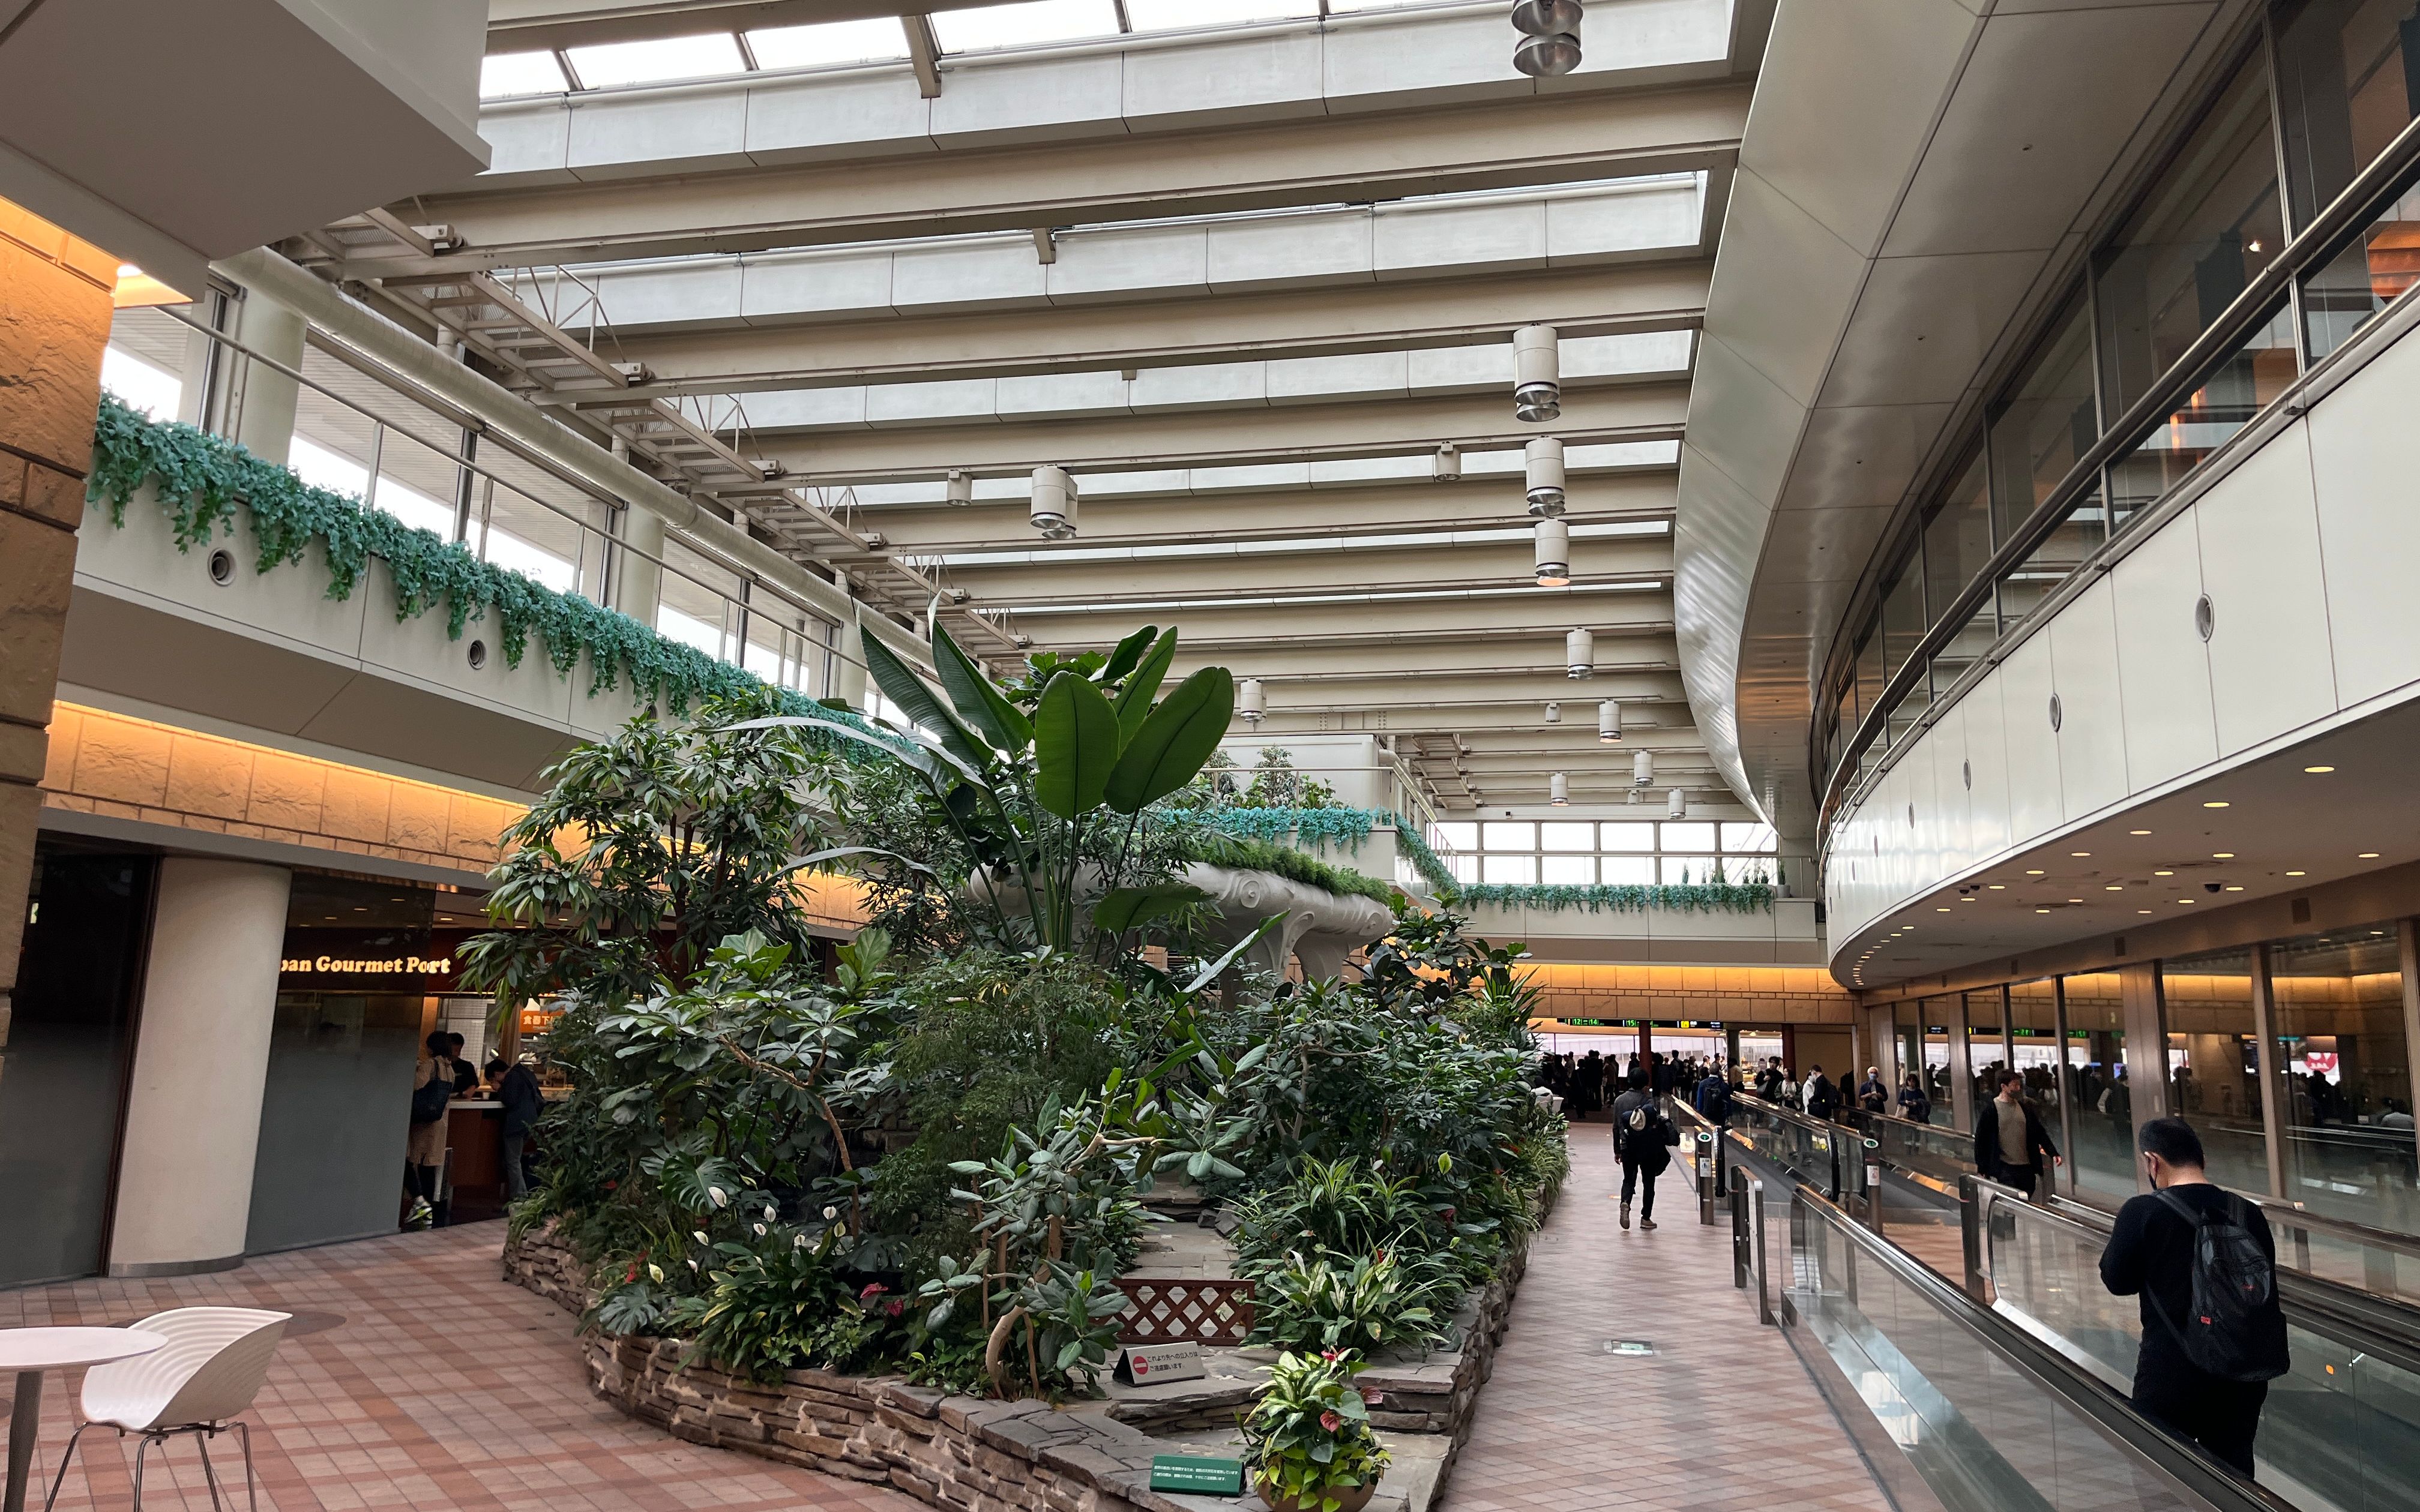 A two-story atrium containing a garden with live plants.